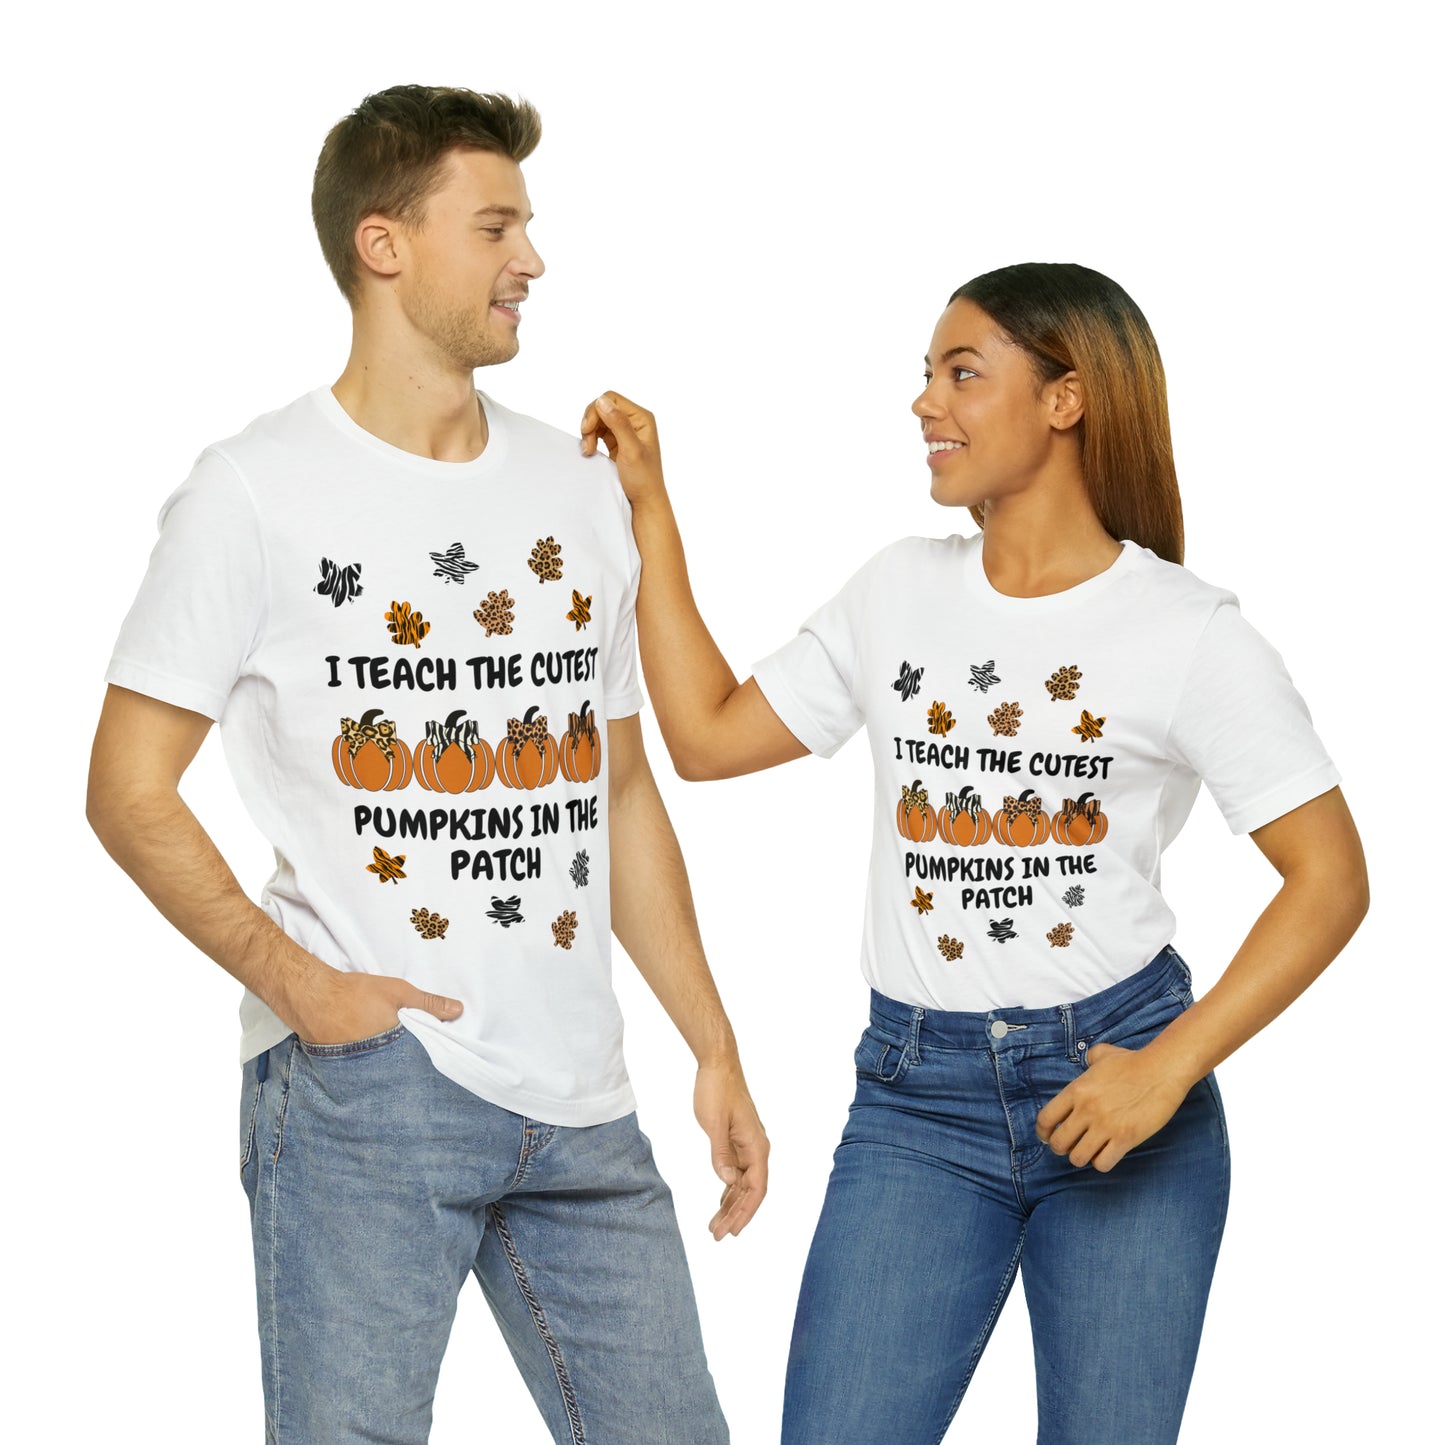 I Teach the Cutest Pumpkins in the Patch Short Sleeve Tee